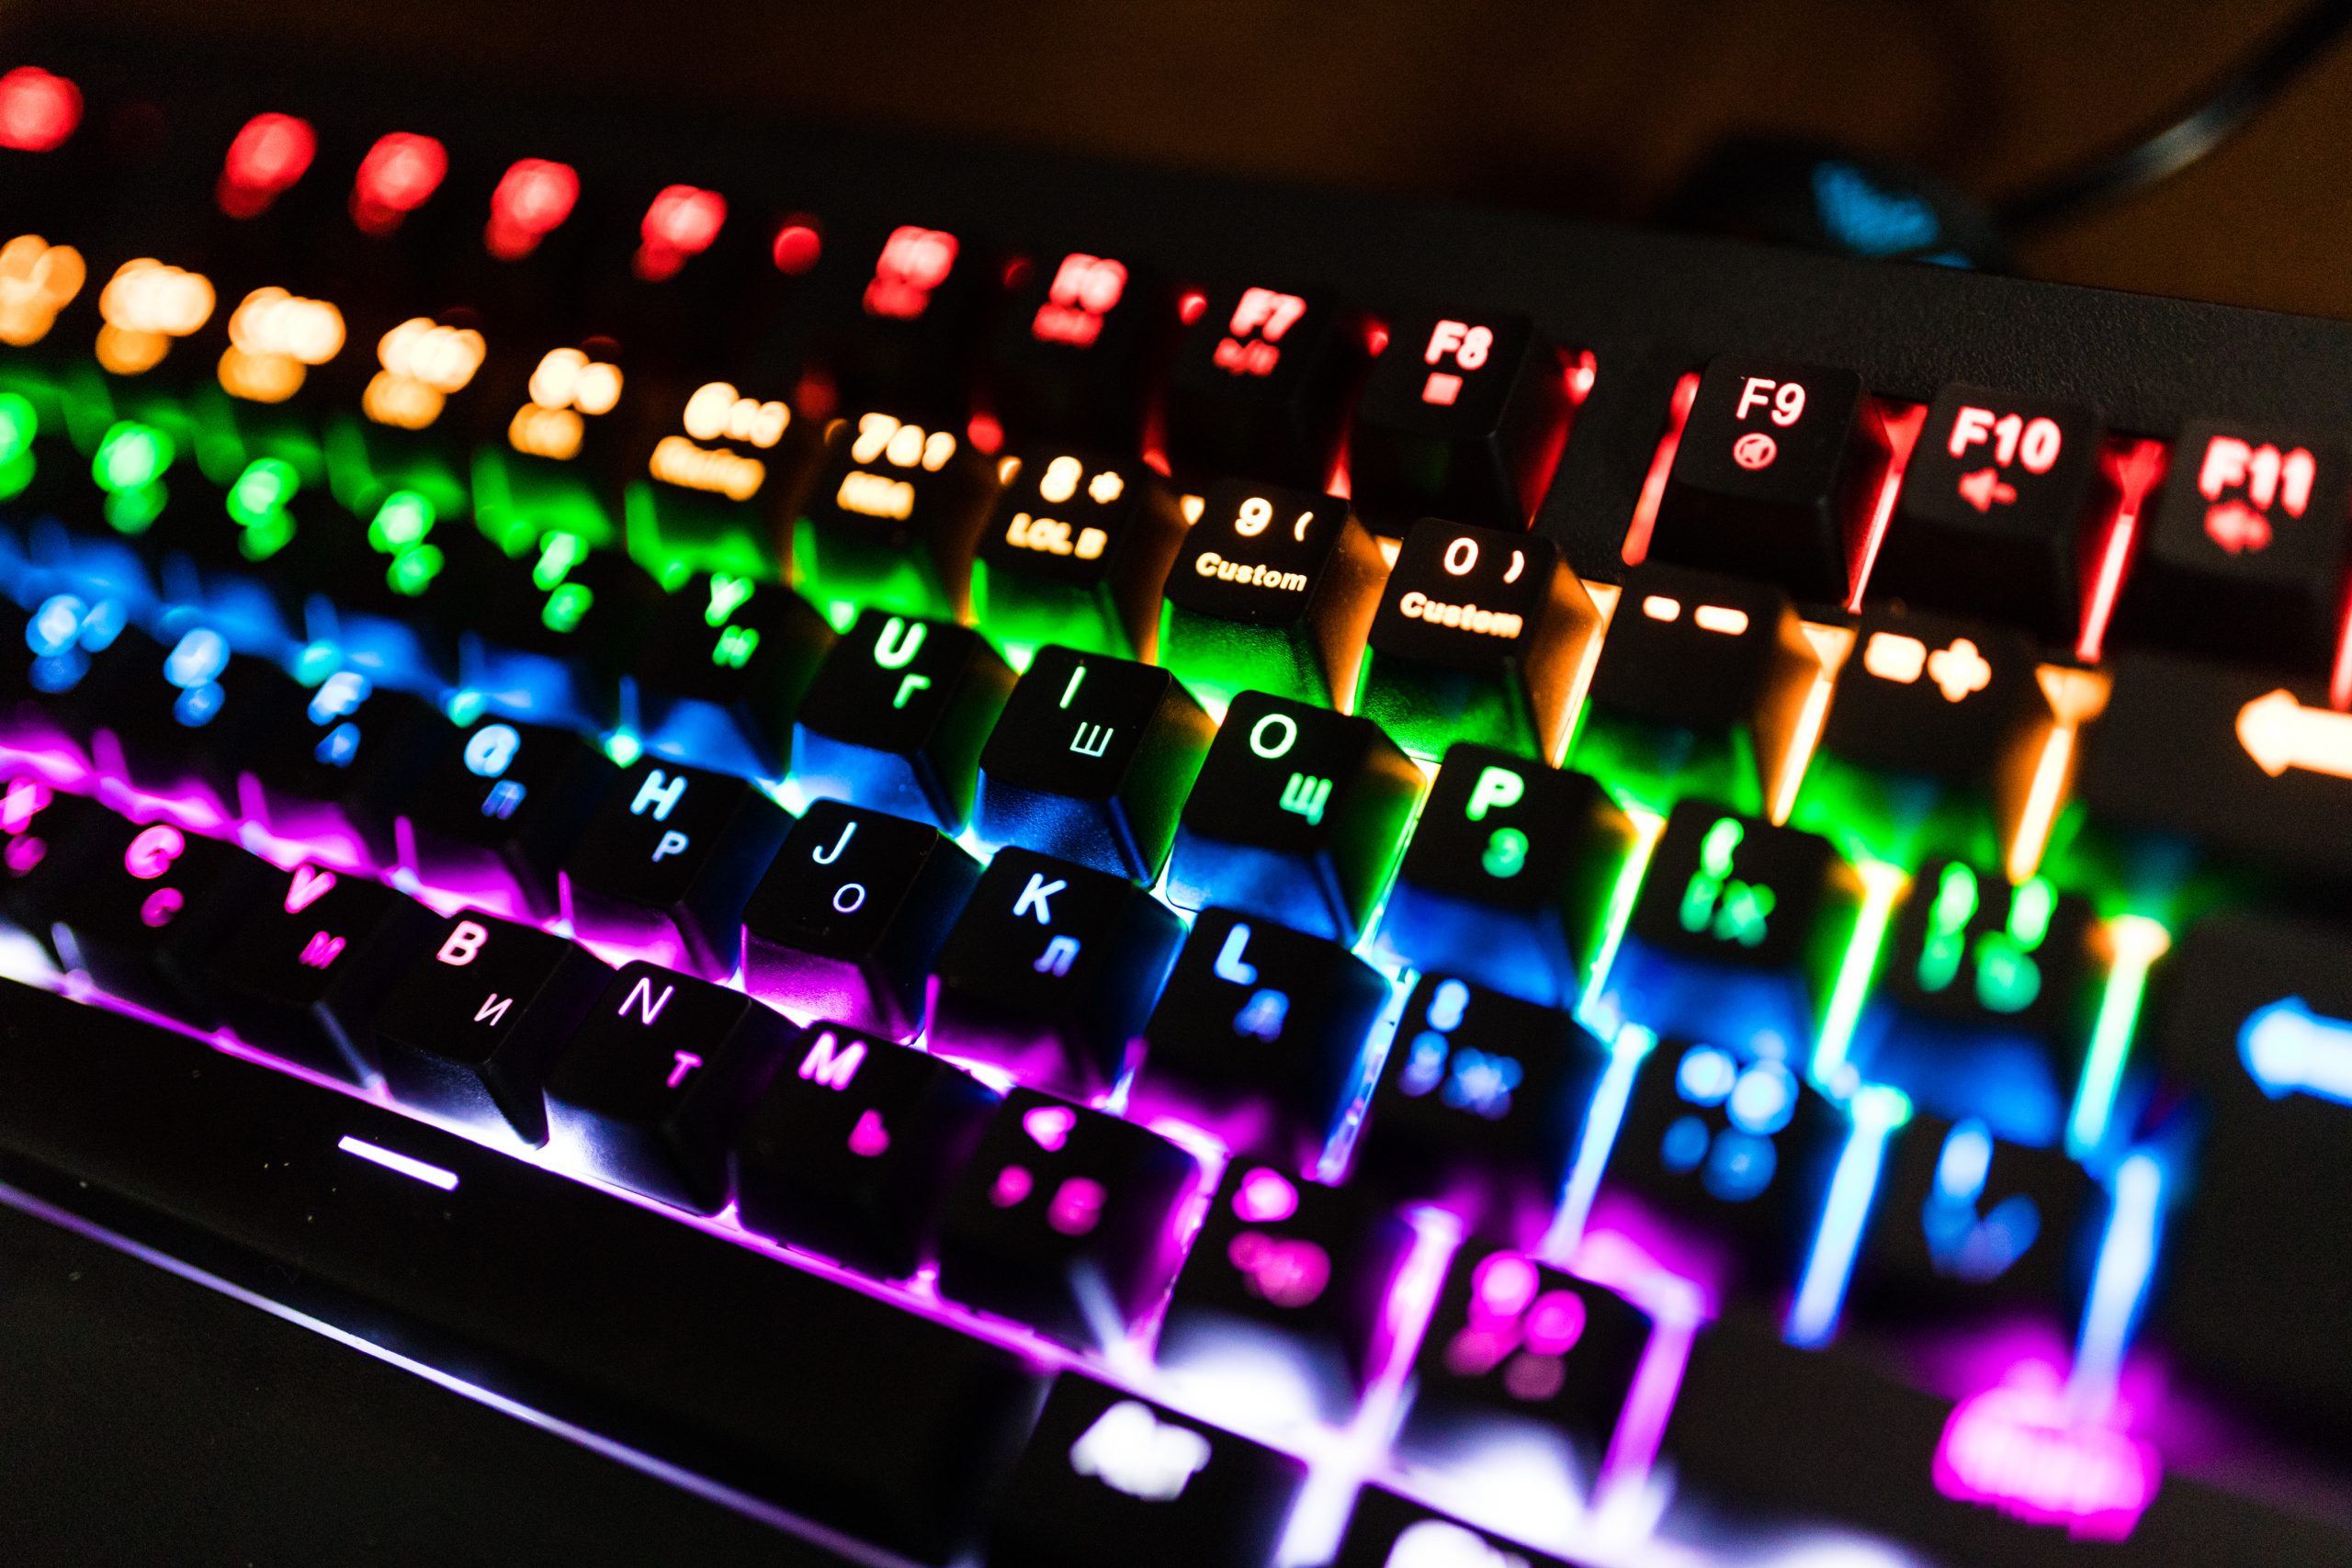 The Redragon Gaming Keyboard | Reviews, Comparisons